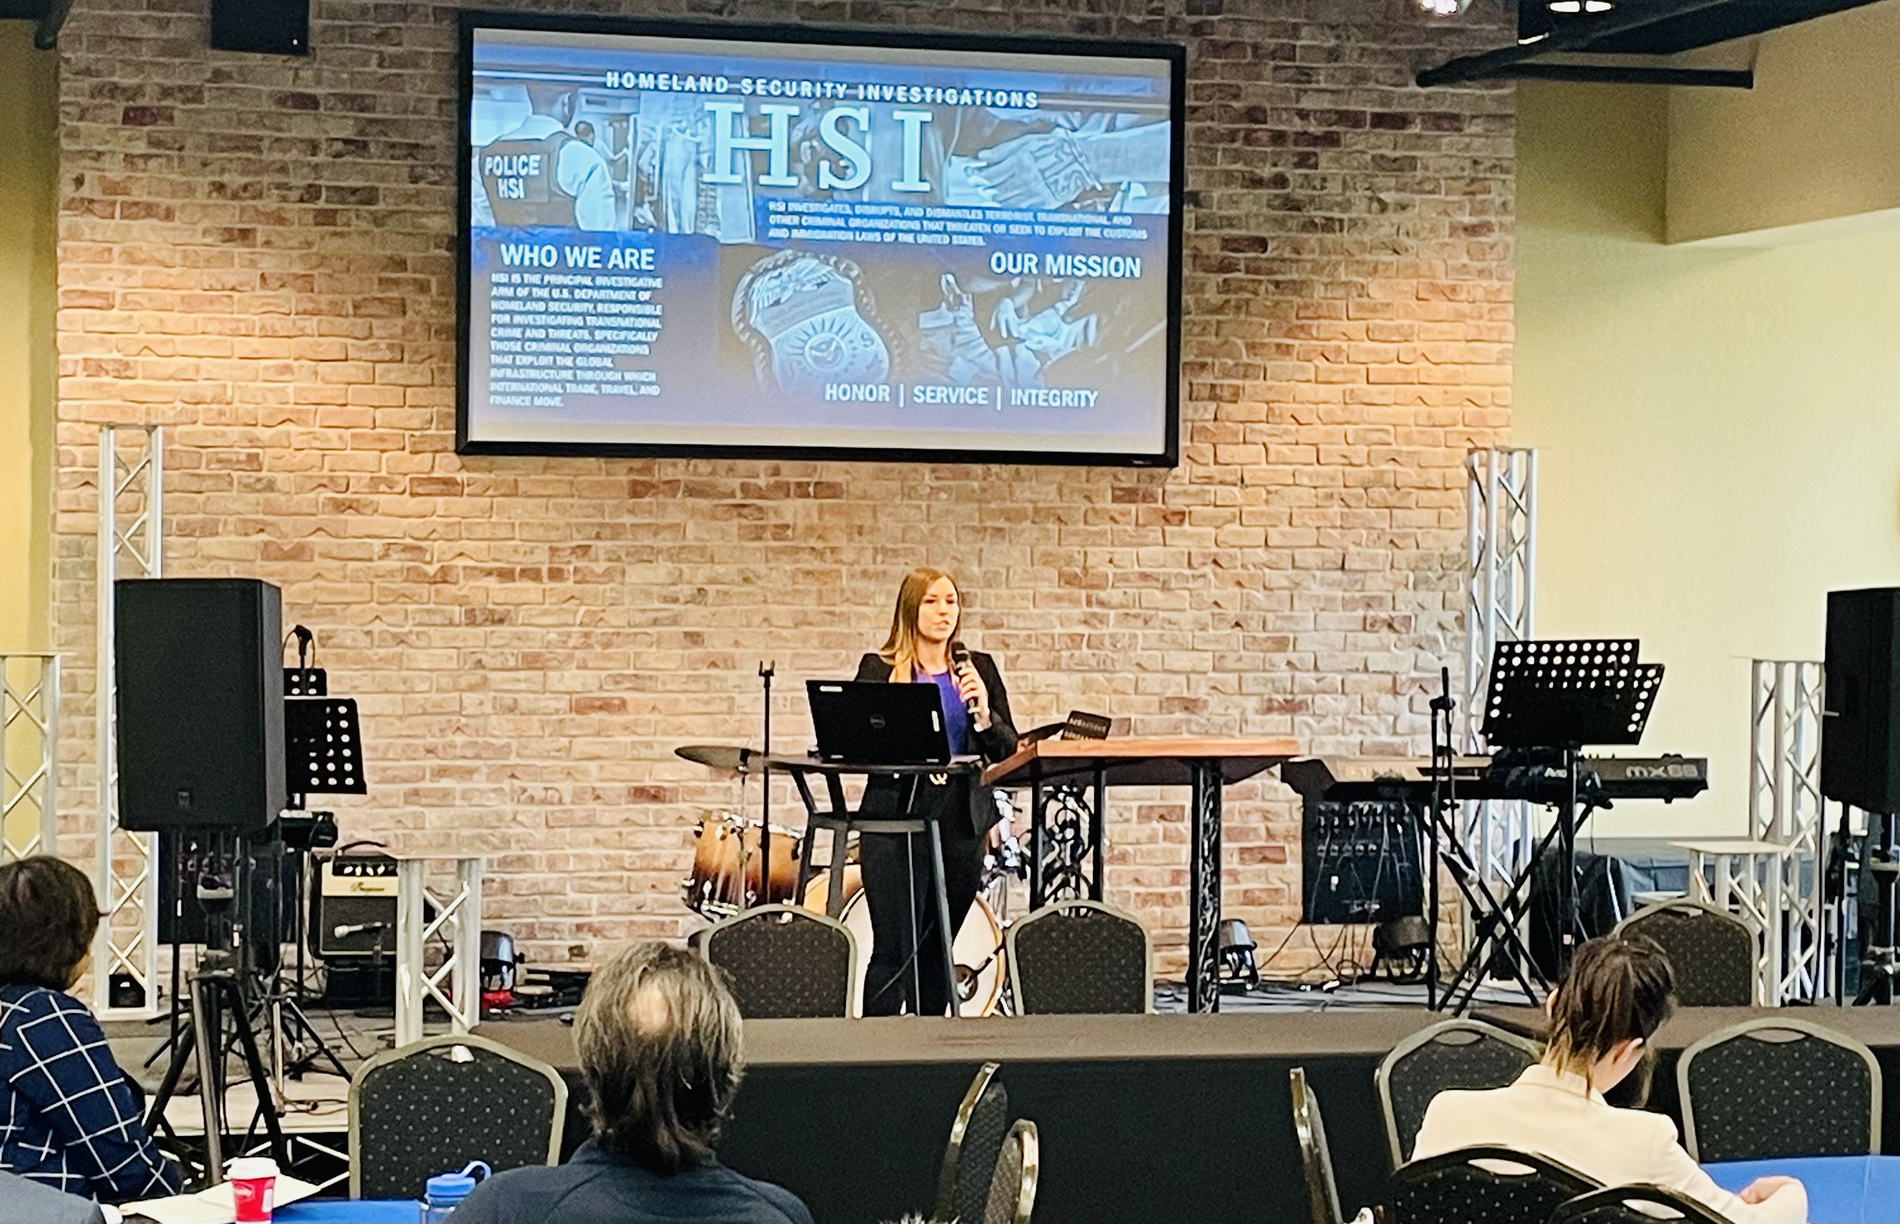 Special Agent Brittany Theriot and Victim Assistance Specialist Jason Ledford, both with HSI New Orleans, spoke at the event and participated in a panel discussion.